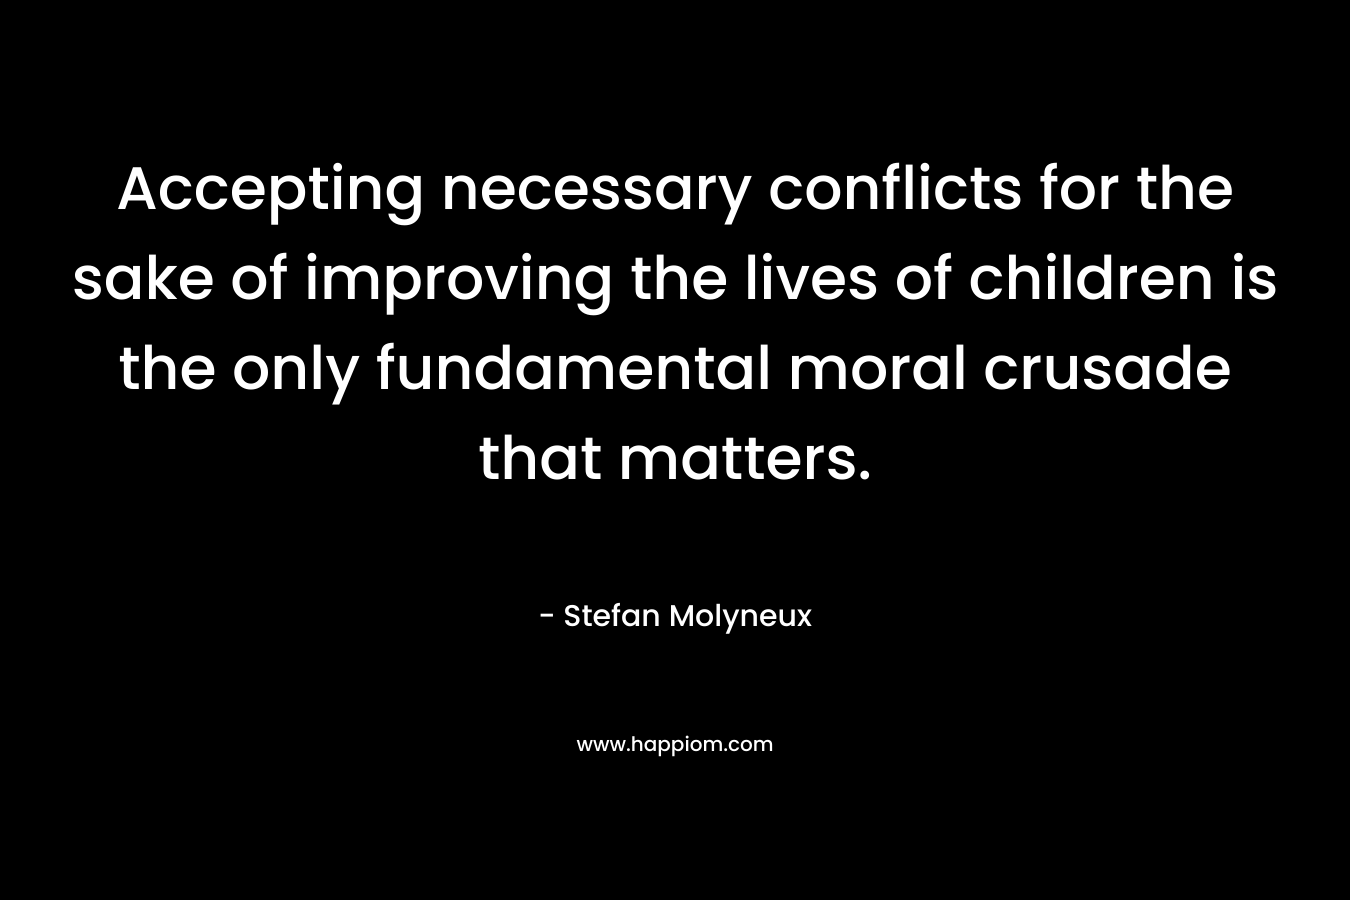 Accepting necessary conflicts for the sake of improving the lives of children is the only fundamental moral crusade that matters.